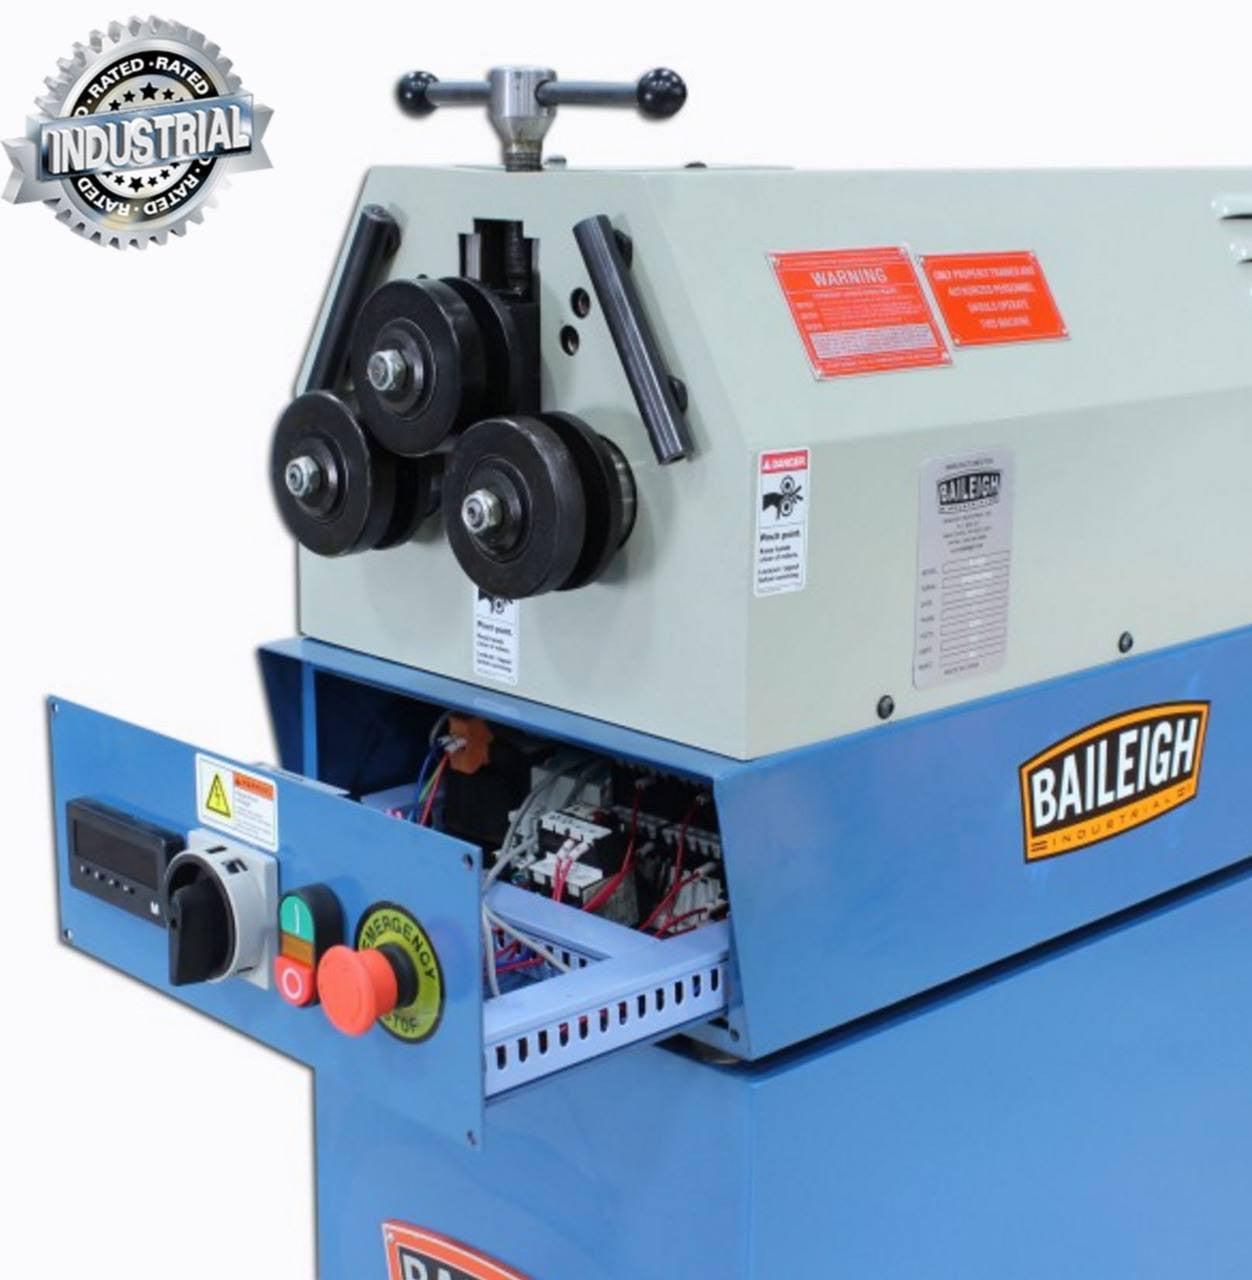 Baileigh industrial Roll Benders - Baileigh industrial Ring Rollers from  Wasp Supplies ltd